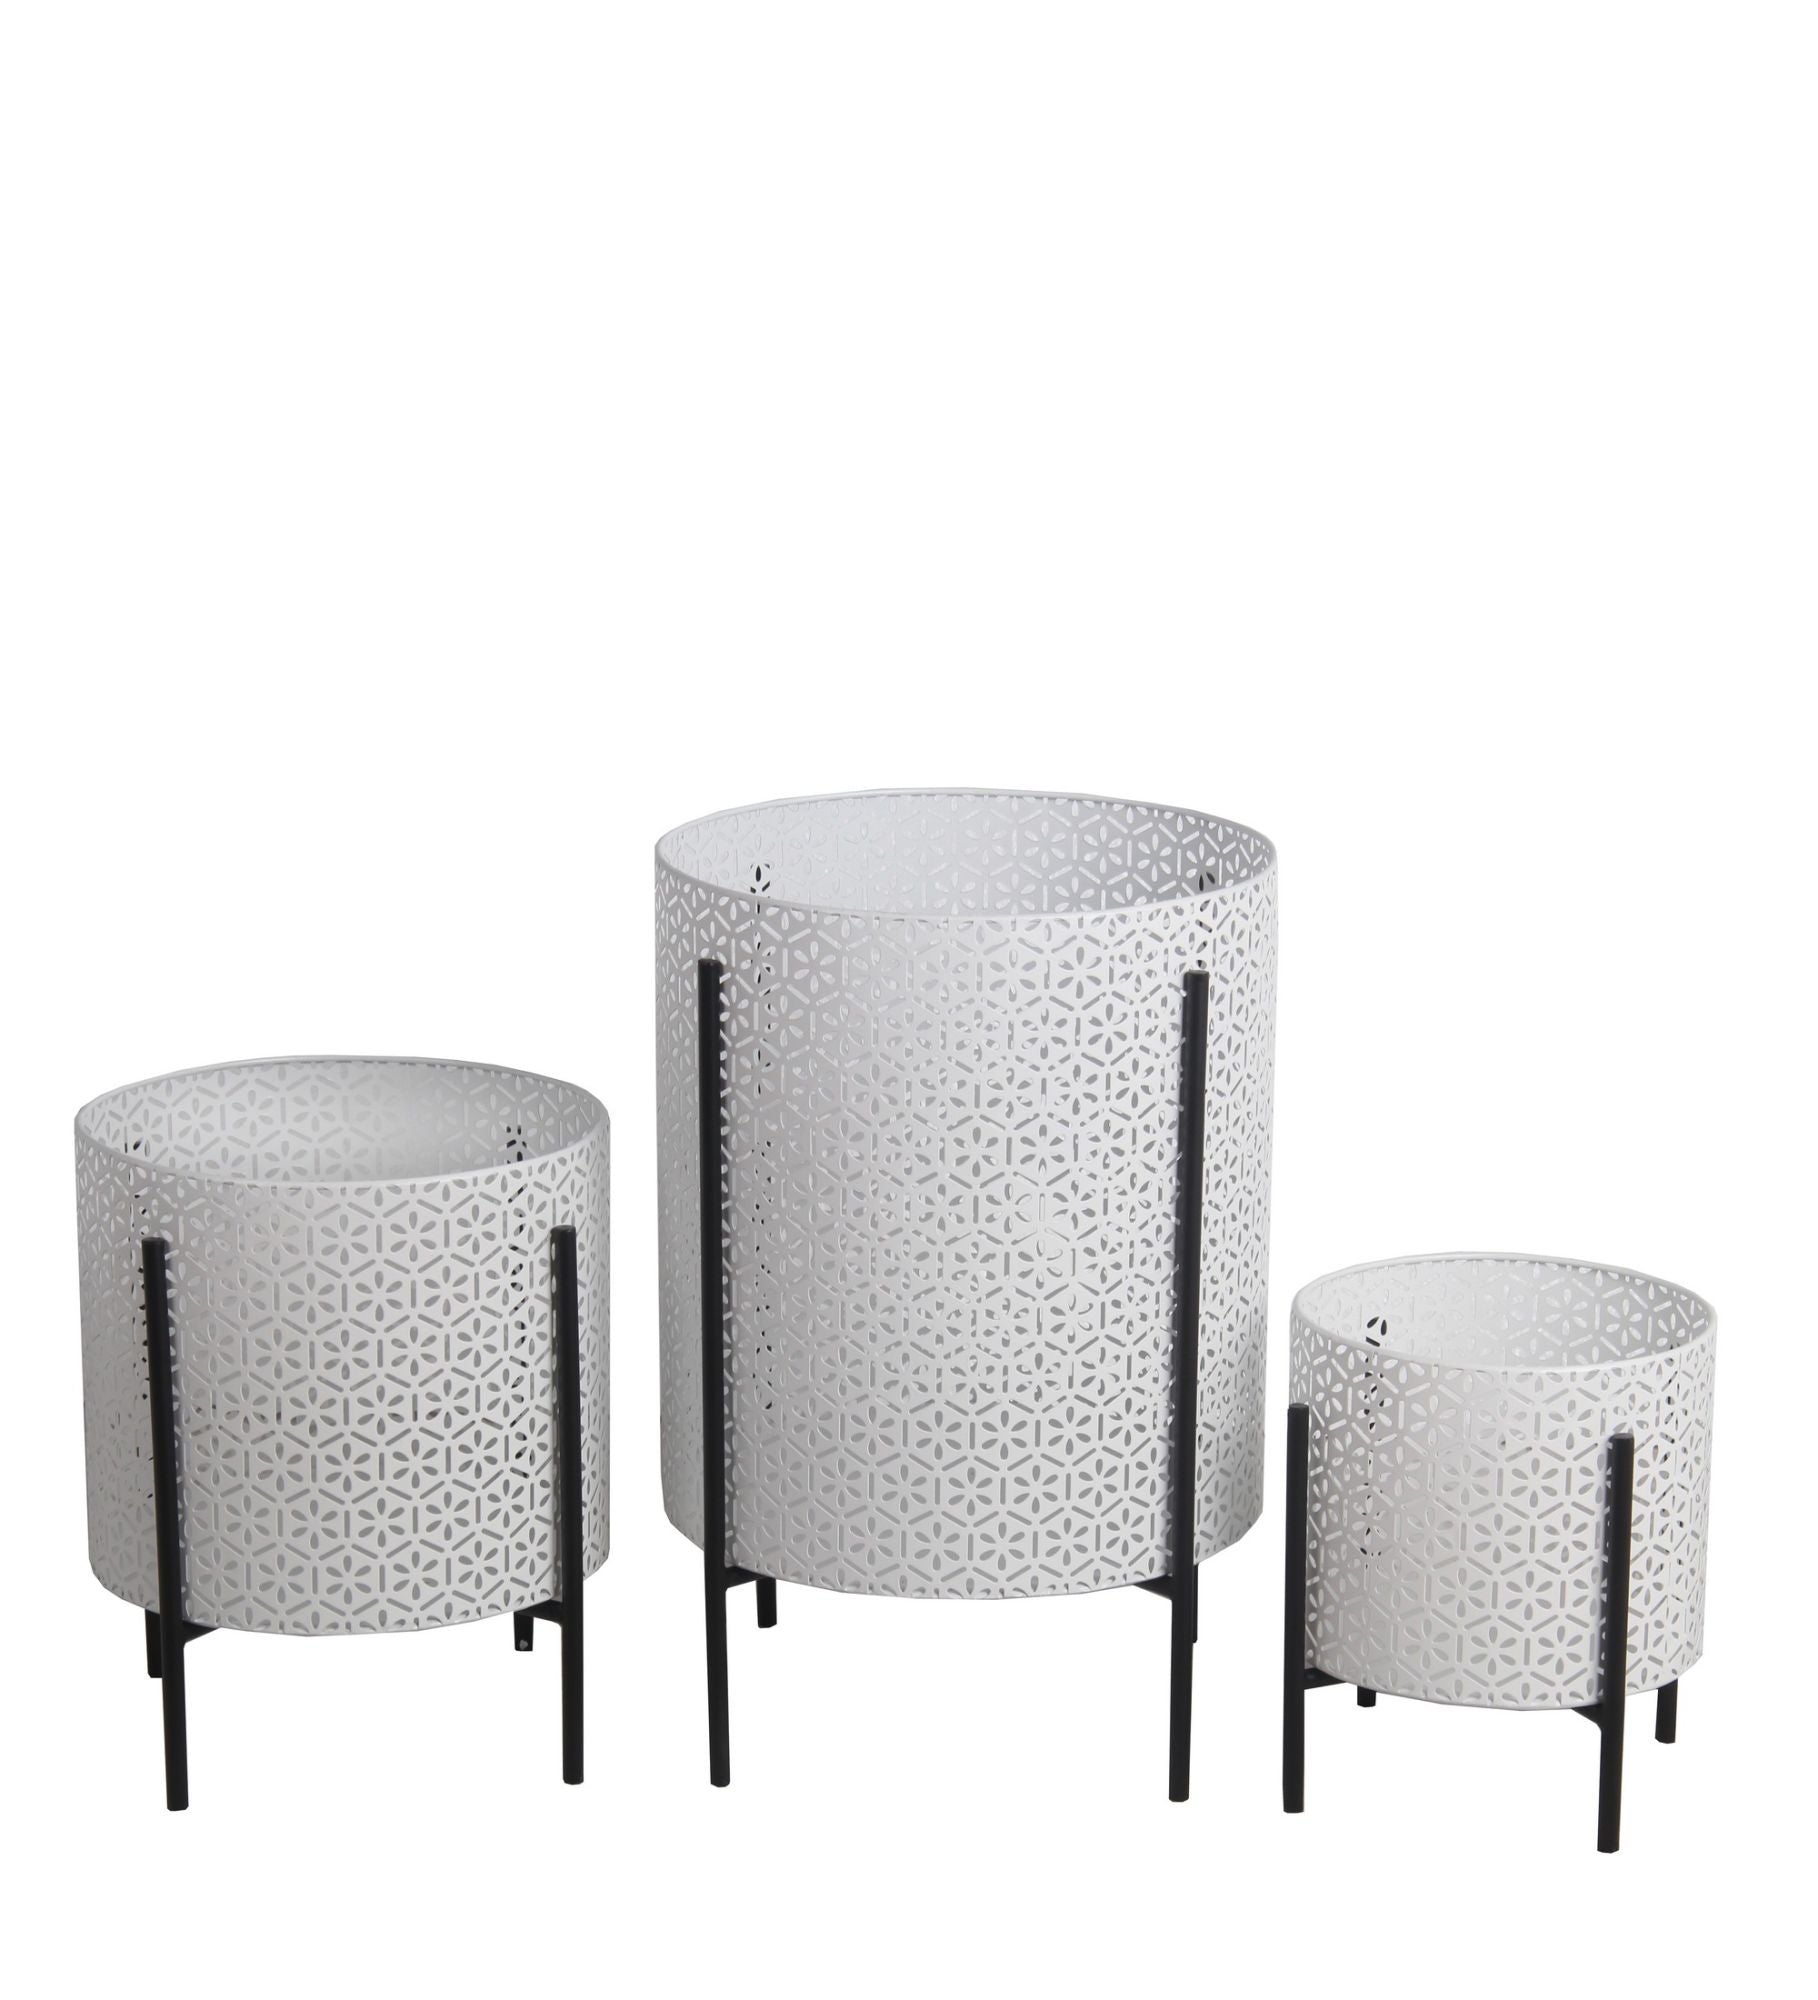 Three Metal Planters with Floral Hexagon Cut Out Design, in varying sizes arranged together.